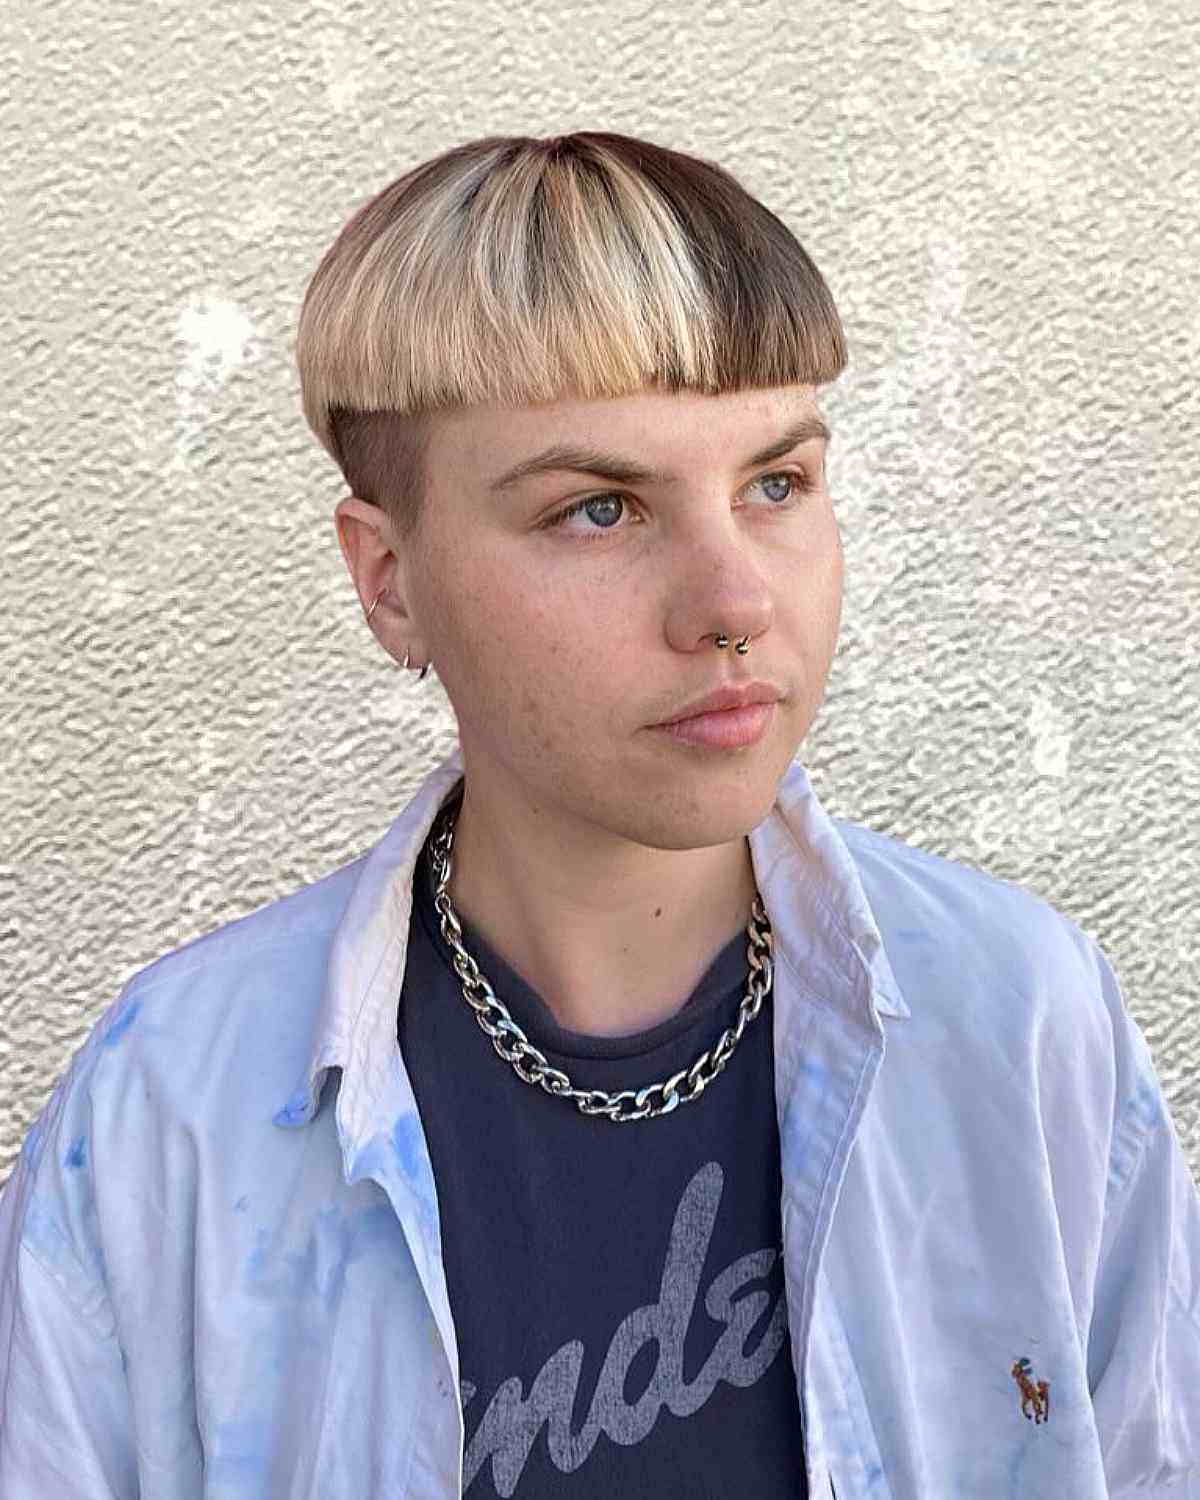 Two-tone bowl cut with platinum blonde and dark brown hair, featuring a gender neutral undercut